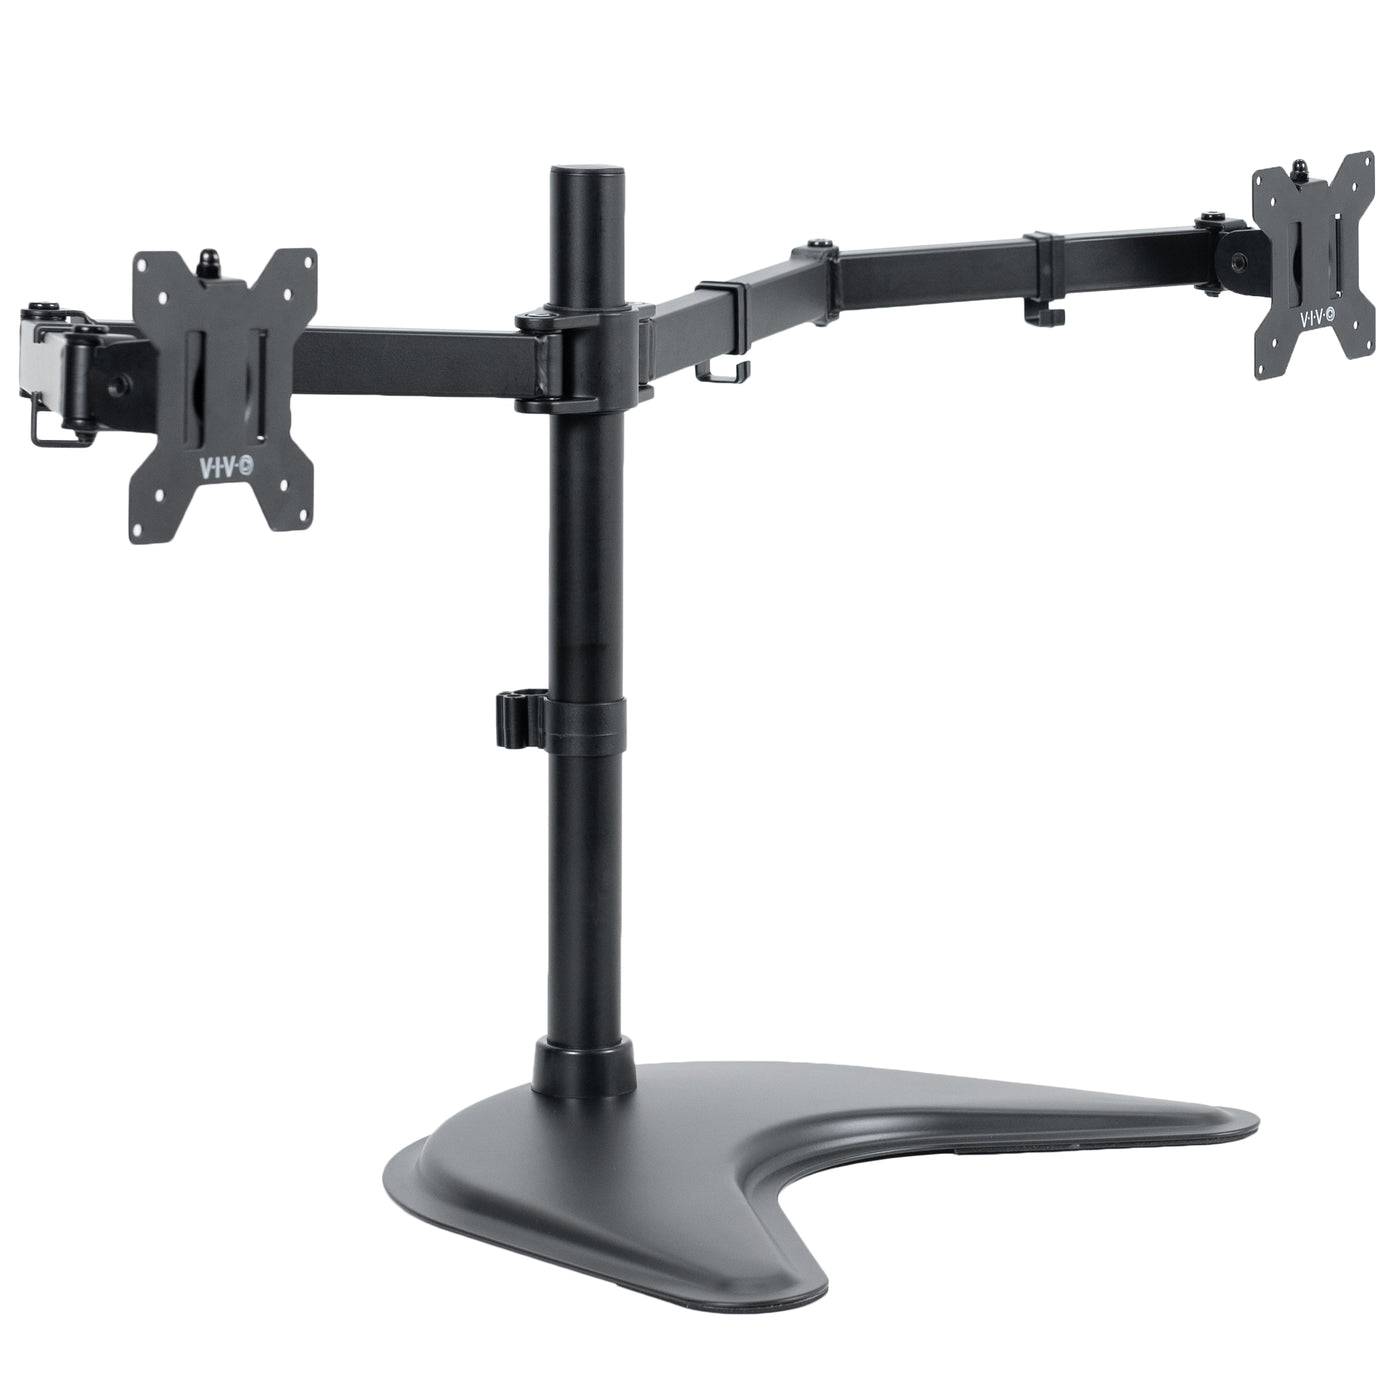 Sturdy adjustable dual monitor stand.